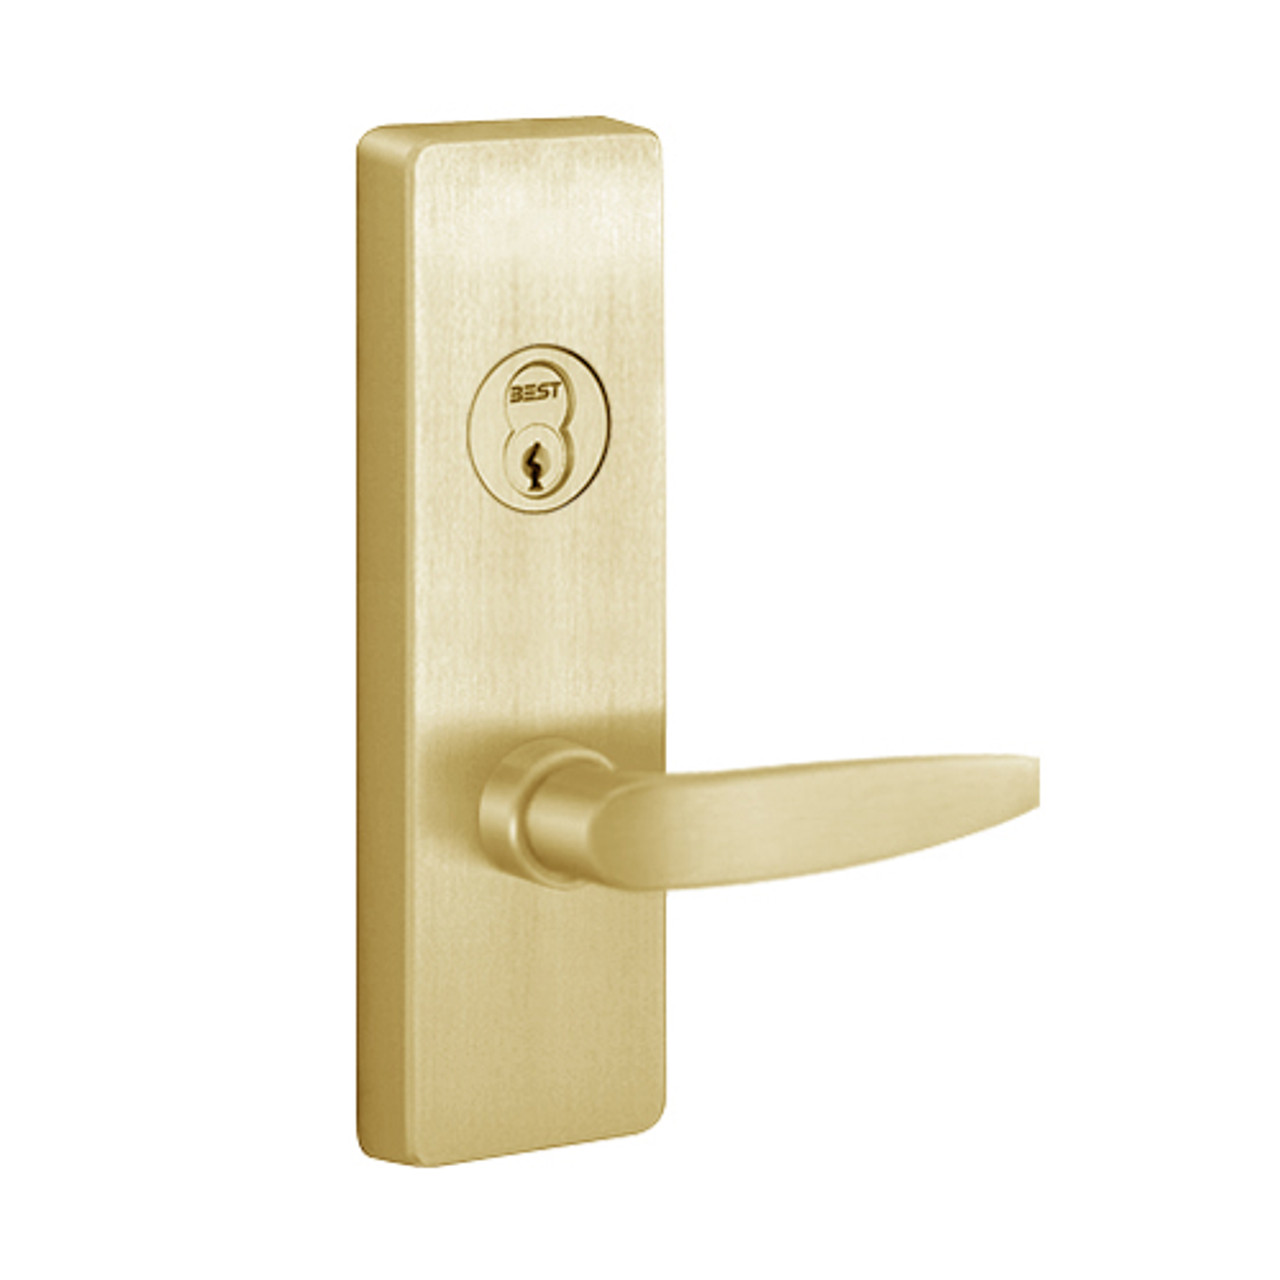 RM4903B-606-RHR PHI Key Retracts Latchbolt Retrofit Trim with B Lever Design for Apex and Olympian Series Exit Device in Satin Brass Finish